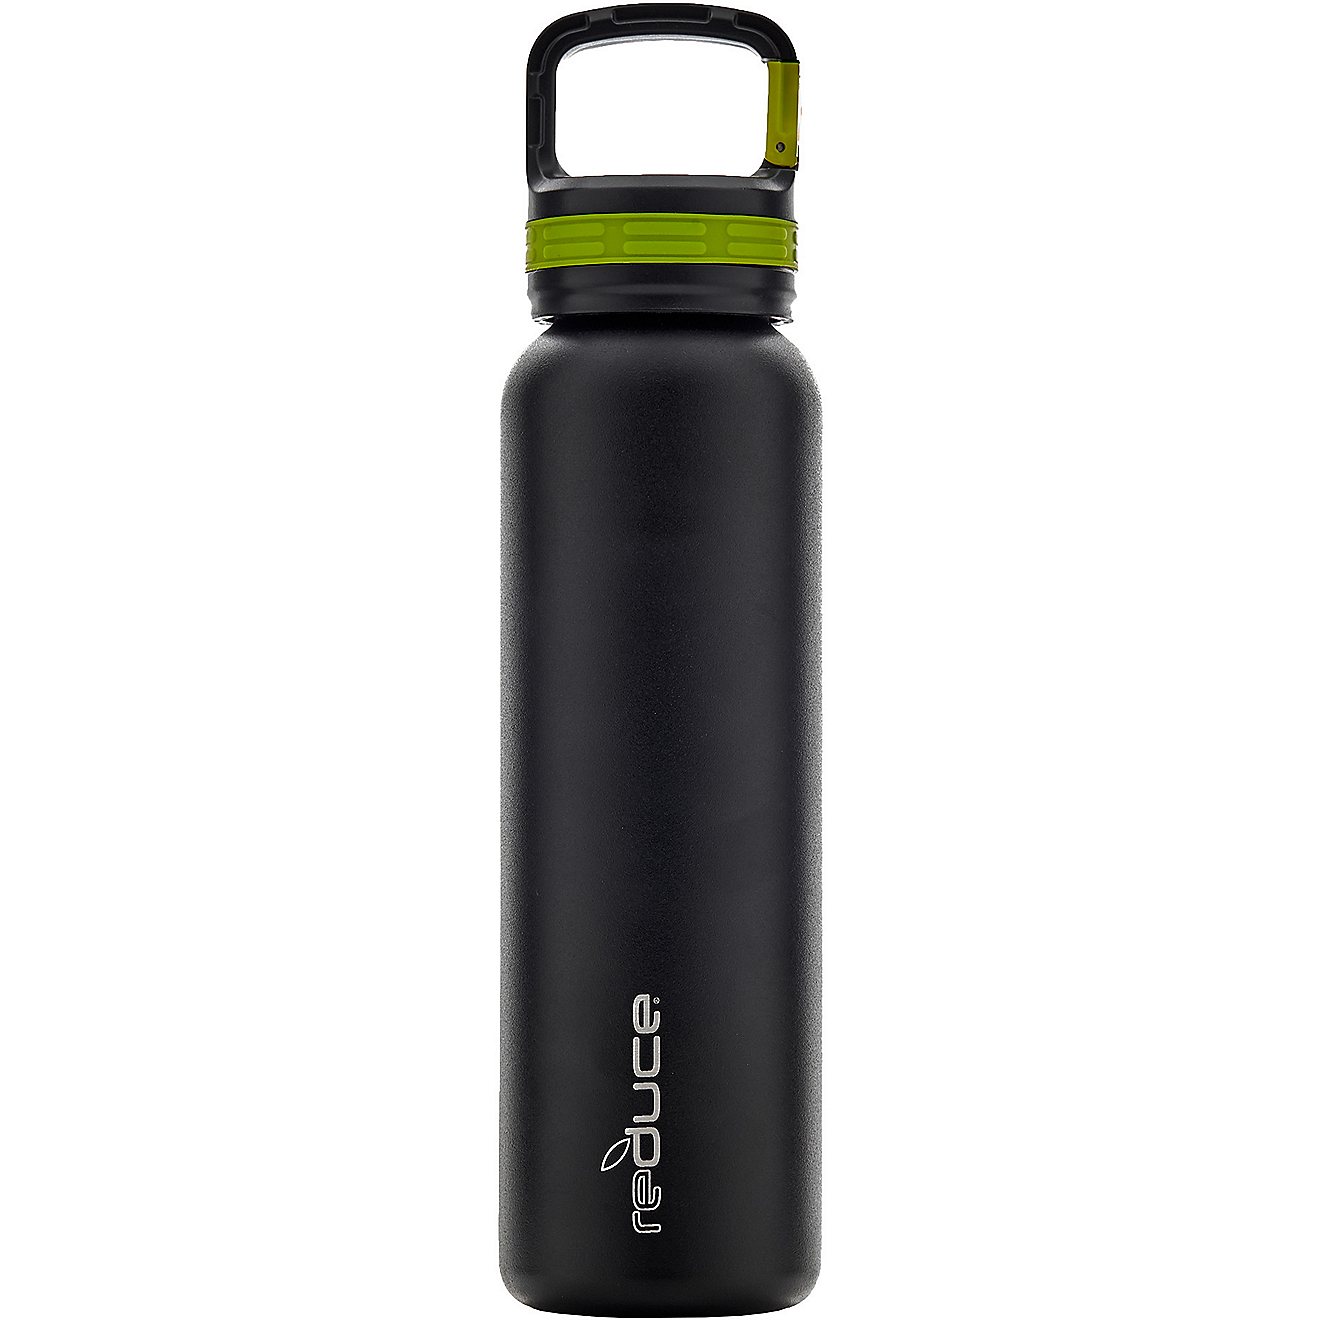 Reduce Hitch 20 oz Insulated Bottle